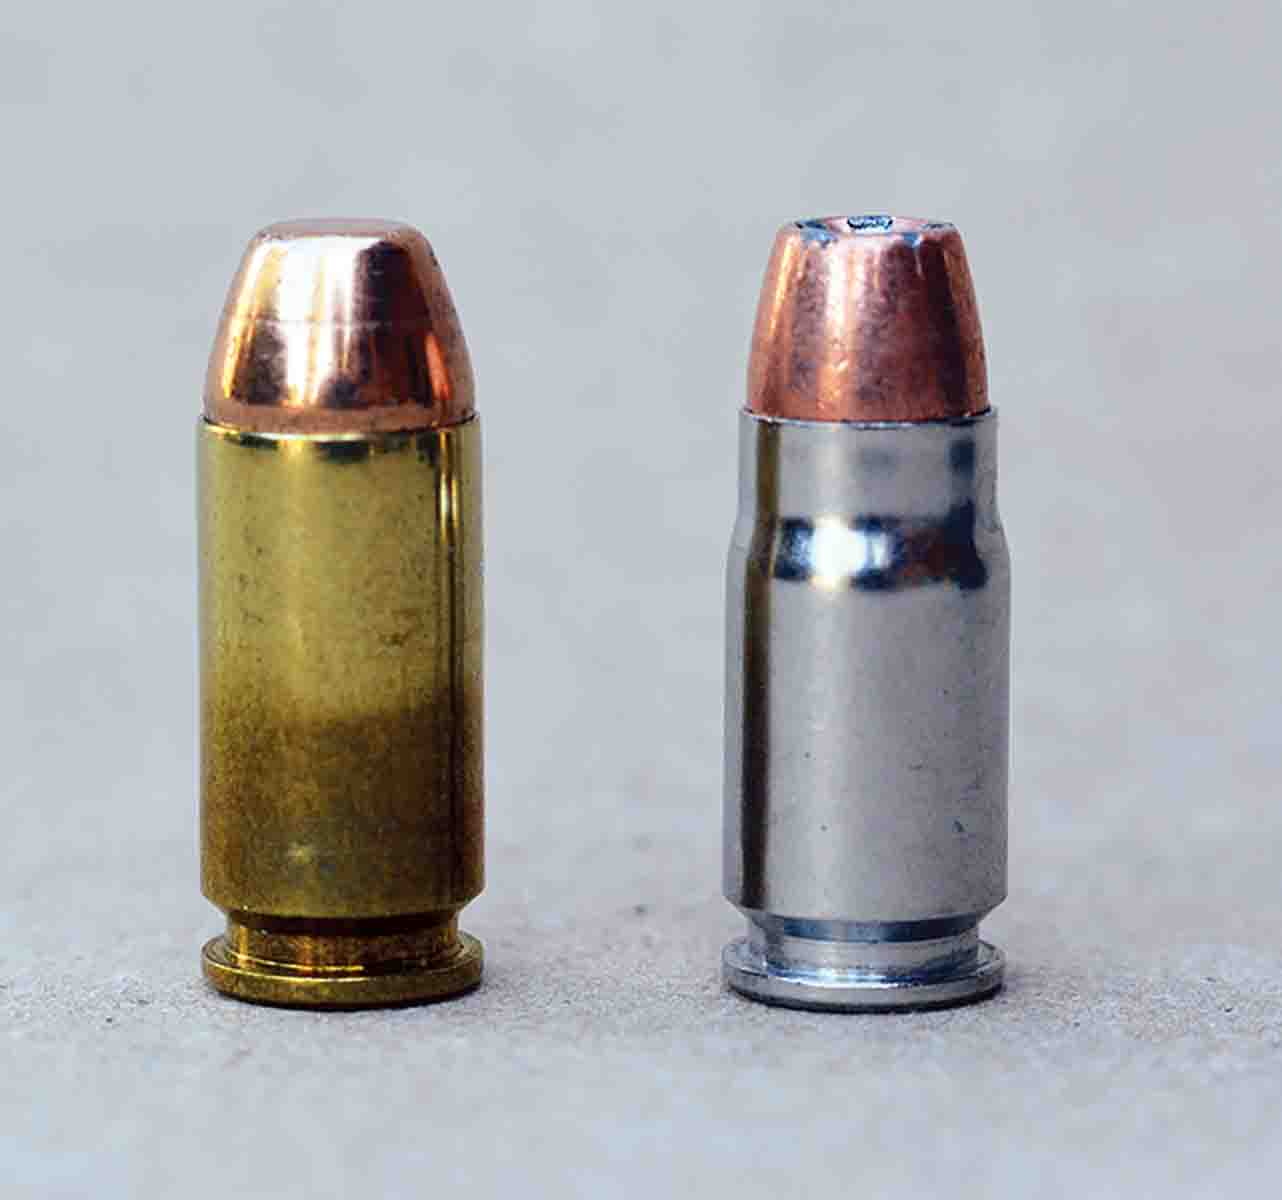 The .40 S&W (left) is the parent case for the .357 Sig (right). However, Sig cases cannot be formed from .40 cases.